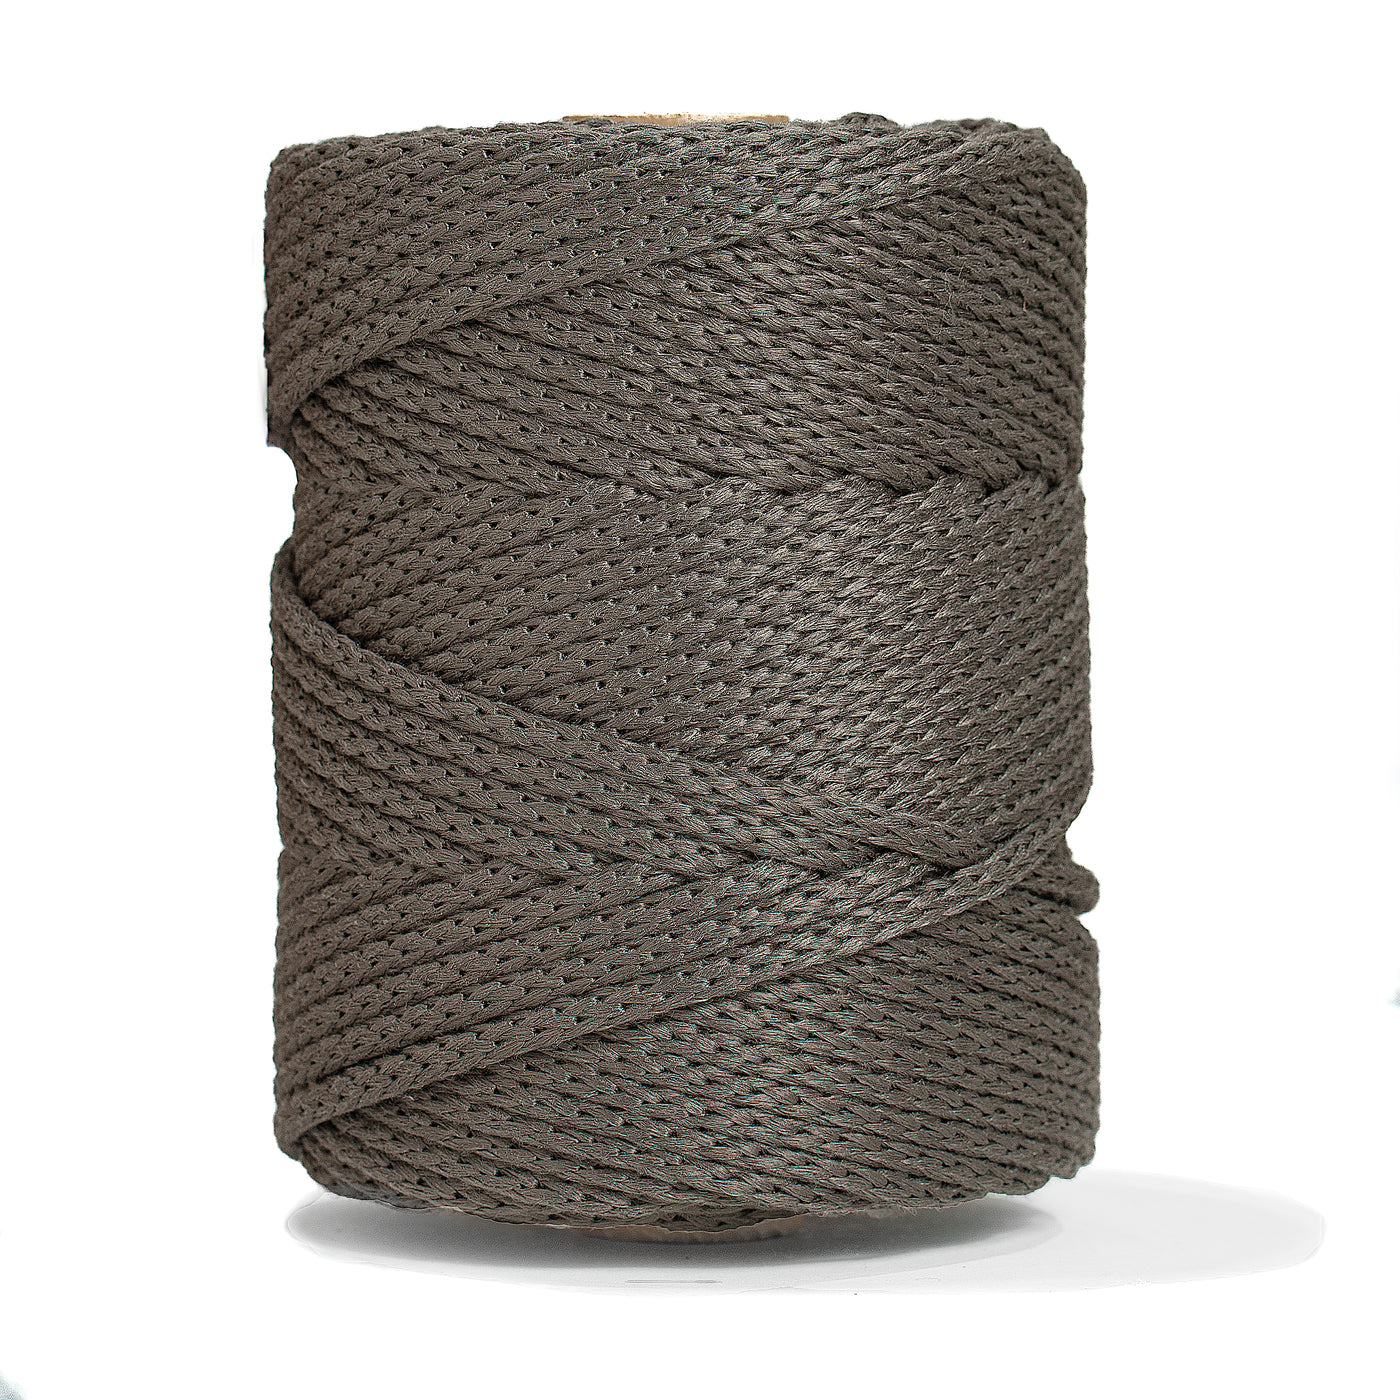 OUTDOOR RECYCLED BRAIDED CORD 6 MM -  DARK TAUPE COLOR